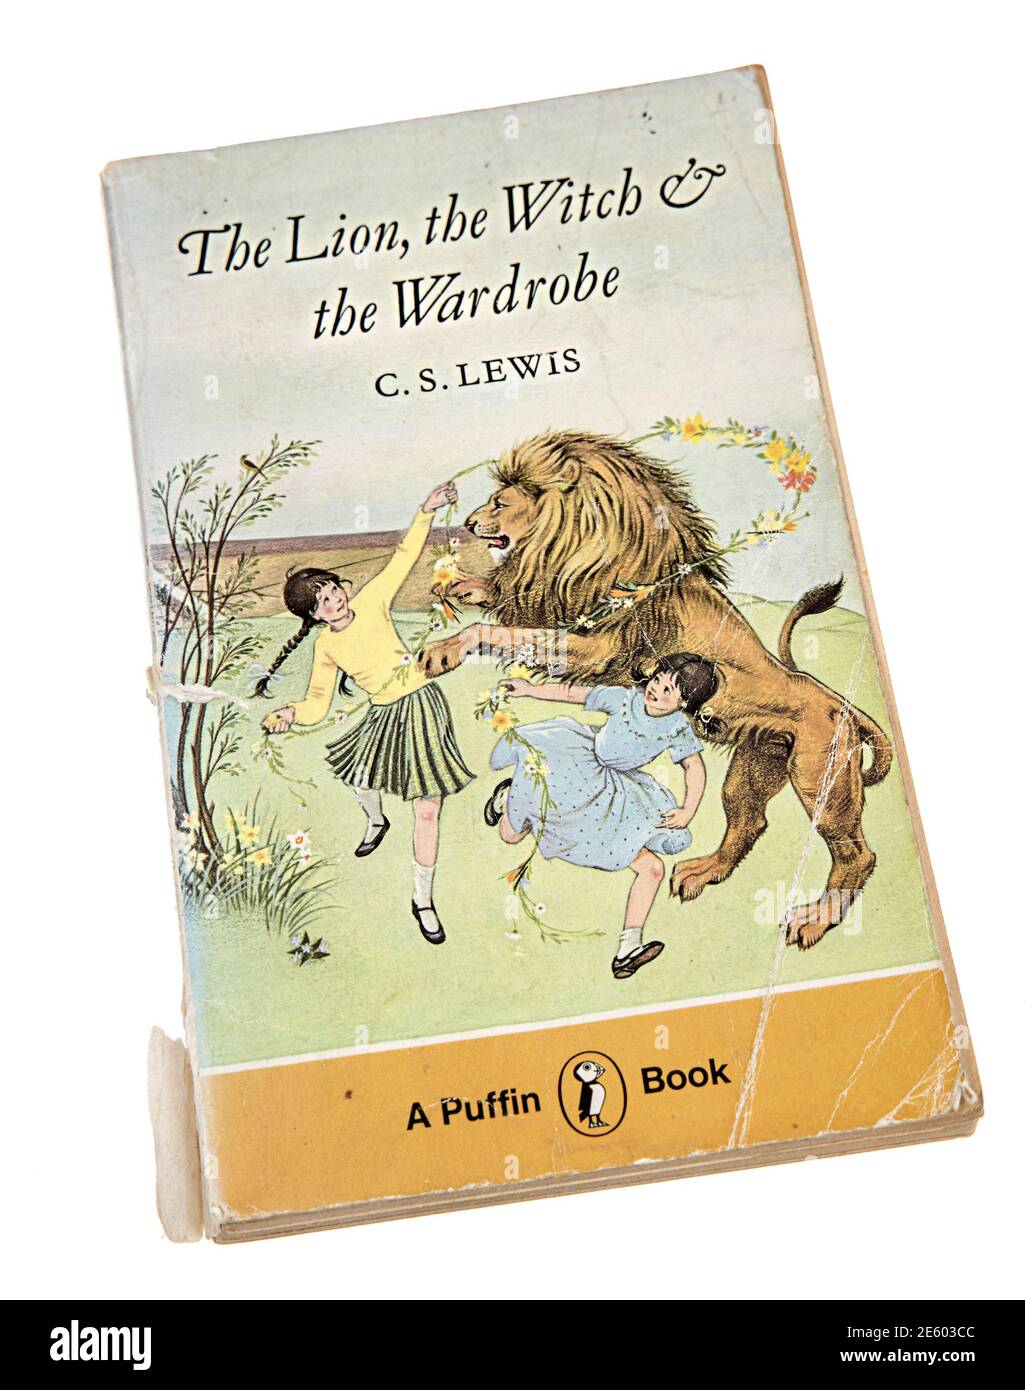 The Lion, the Witch and the Wardrobe paperback book by C.S. Lewis published by Puffin first published 1950 Stock Photo